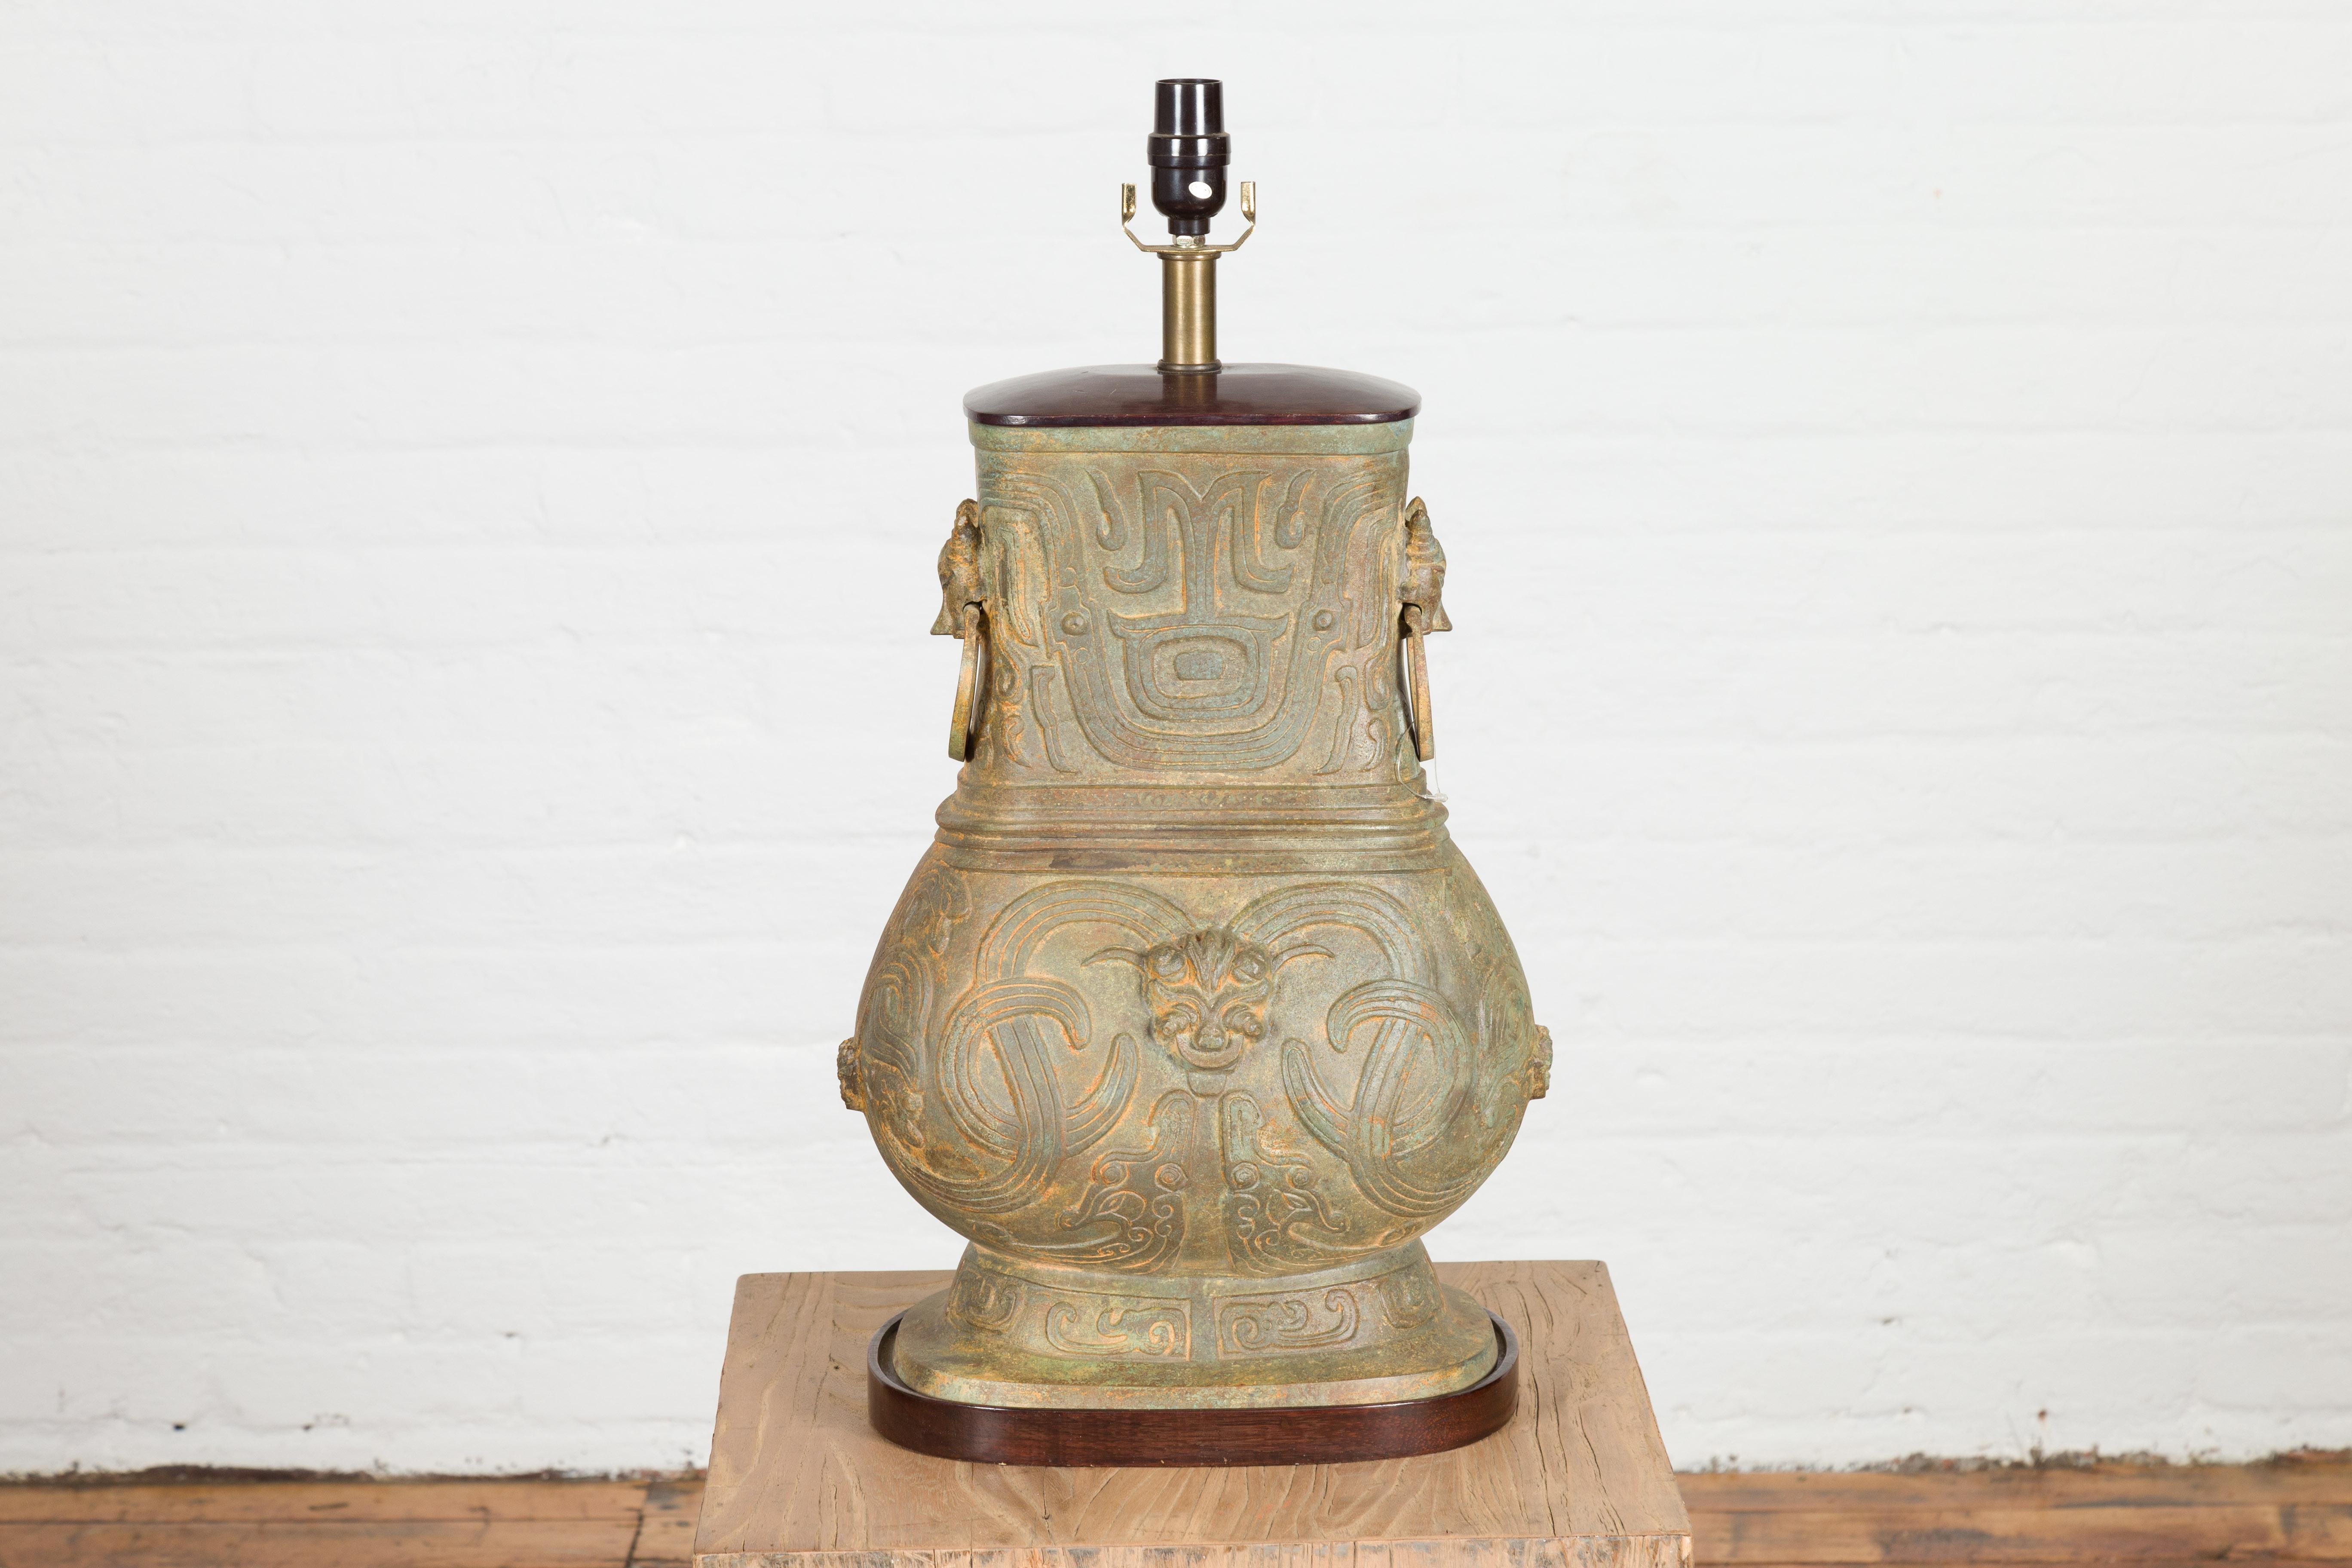 A vintage cast bronze Chinese Hu vessel style table lamp from the Mid-20th Century, with interlinking waves, dragon heads and mythical animals. Wired for the USA, this cast bronze table lamp showcases a sinuous silhouette with a narrow top and wide